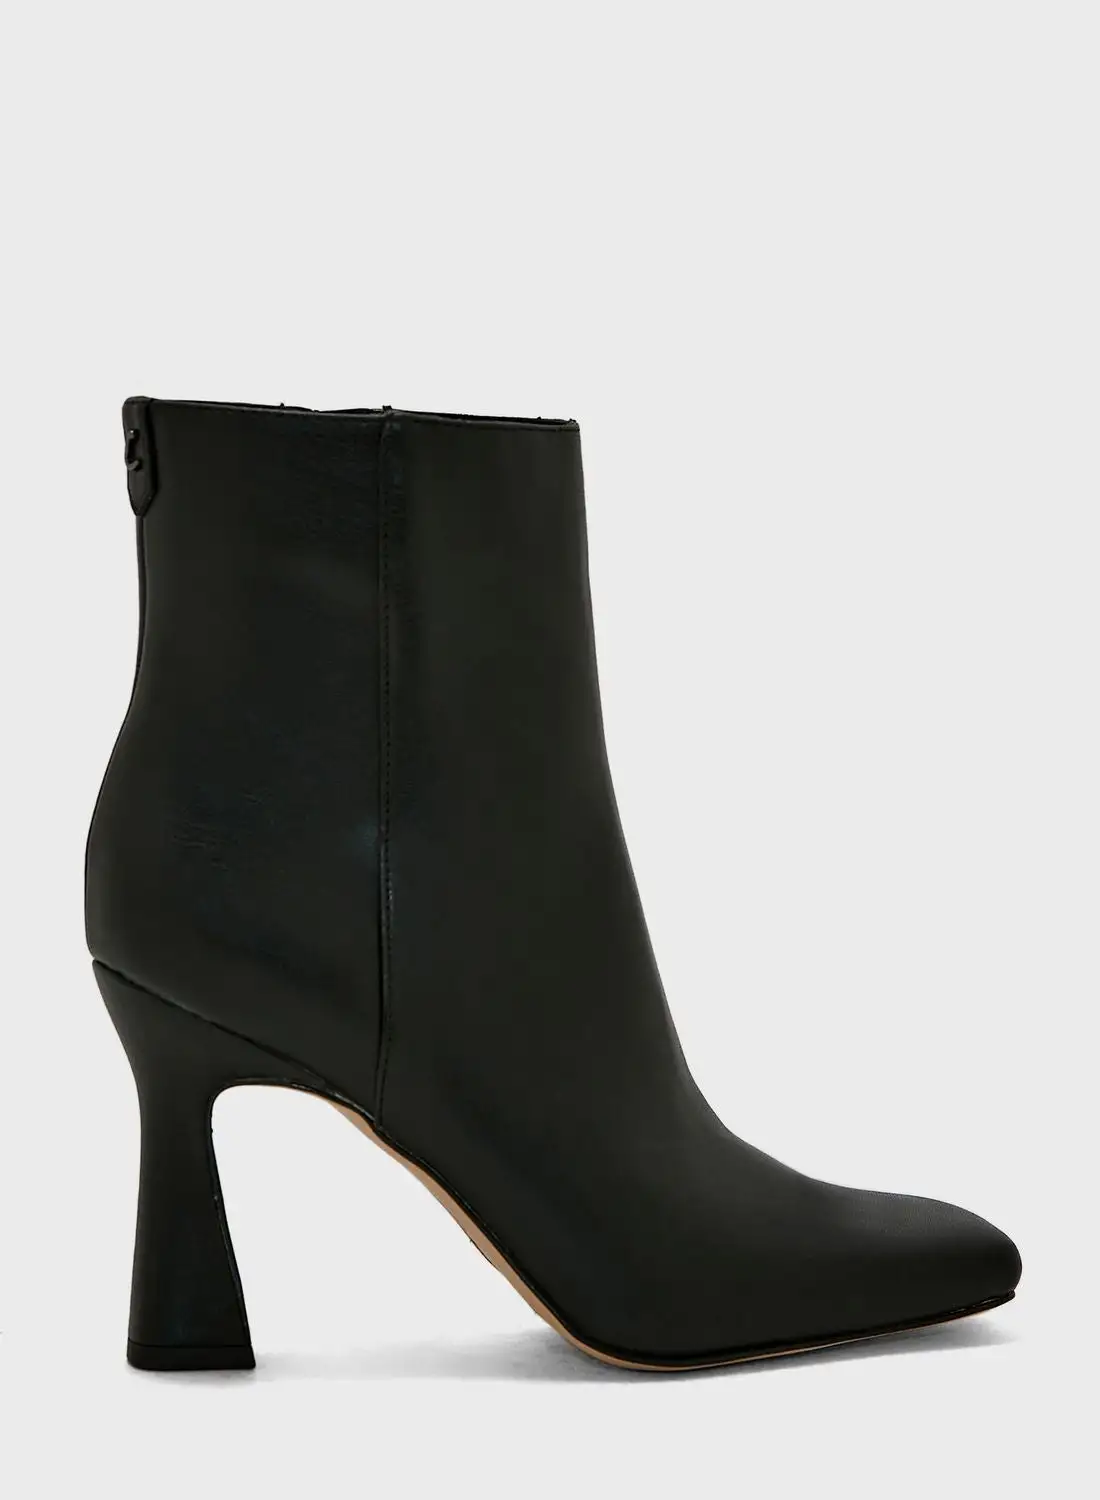 Circus NY Emma Ankle Boots